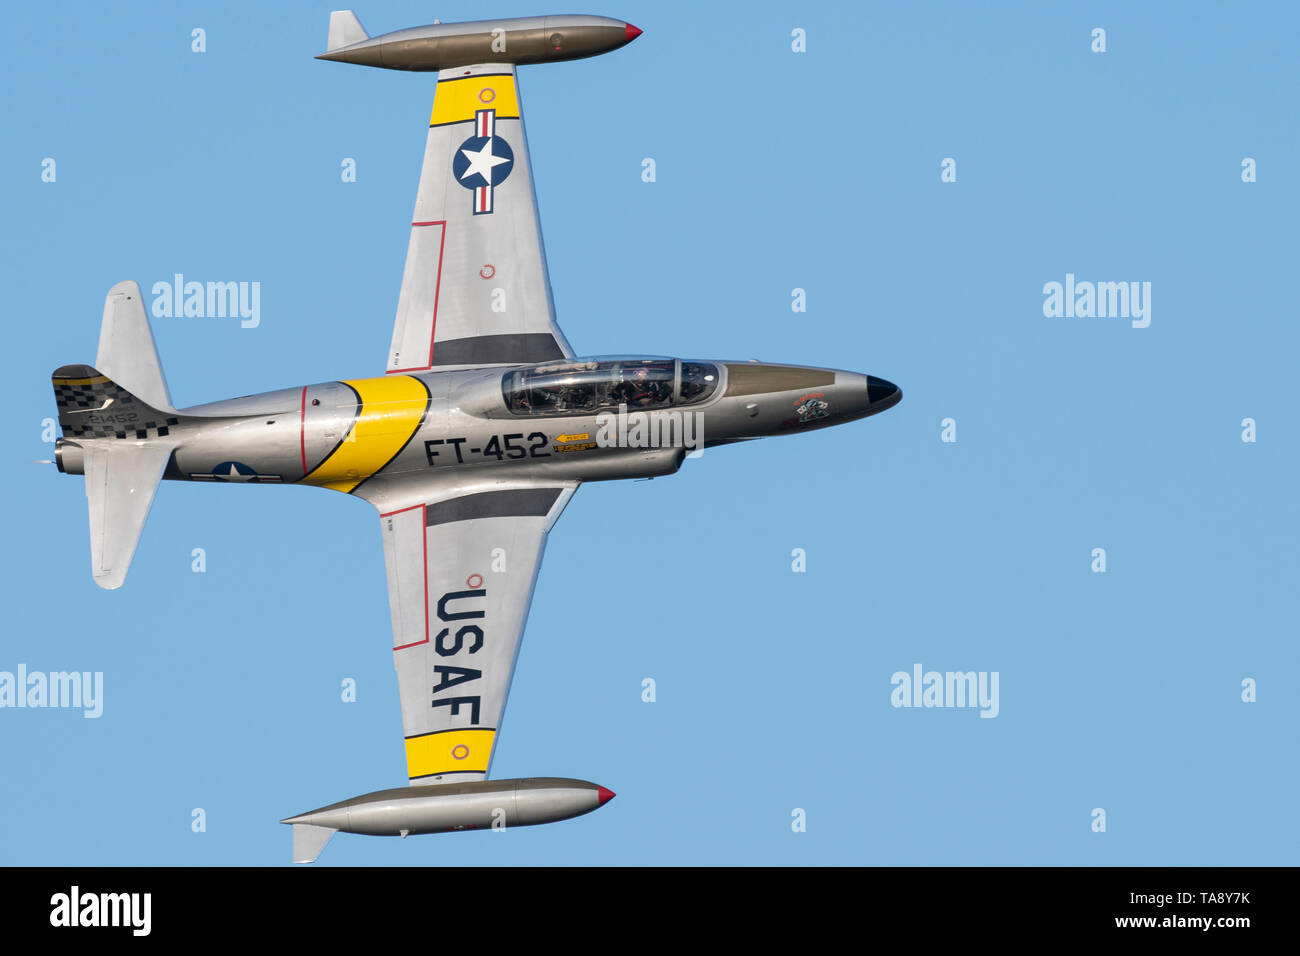 Greg Colyner flies his T-33 Shooting Star trainer jet during the Twilight Show before the Defenders of Liberty Air & Space Show at Barksdale Air Force Base, La., May 17, 2019.The airshow was first held in 1933 and is a full weekend of military and civilian aircraft and performances and displays. (U.S. Air Force photo by Senior Airman Maxwell Daigle) Stock Photo